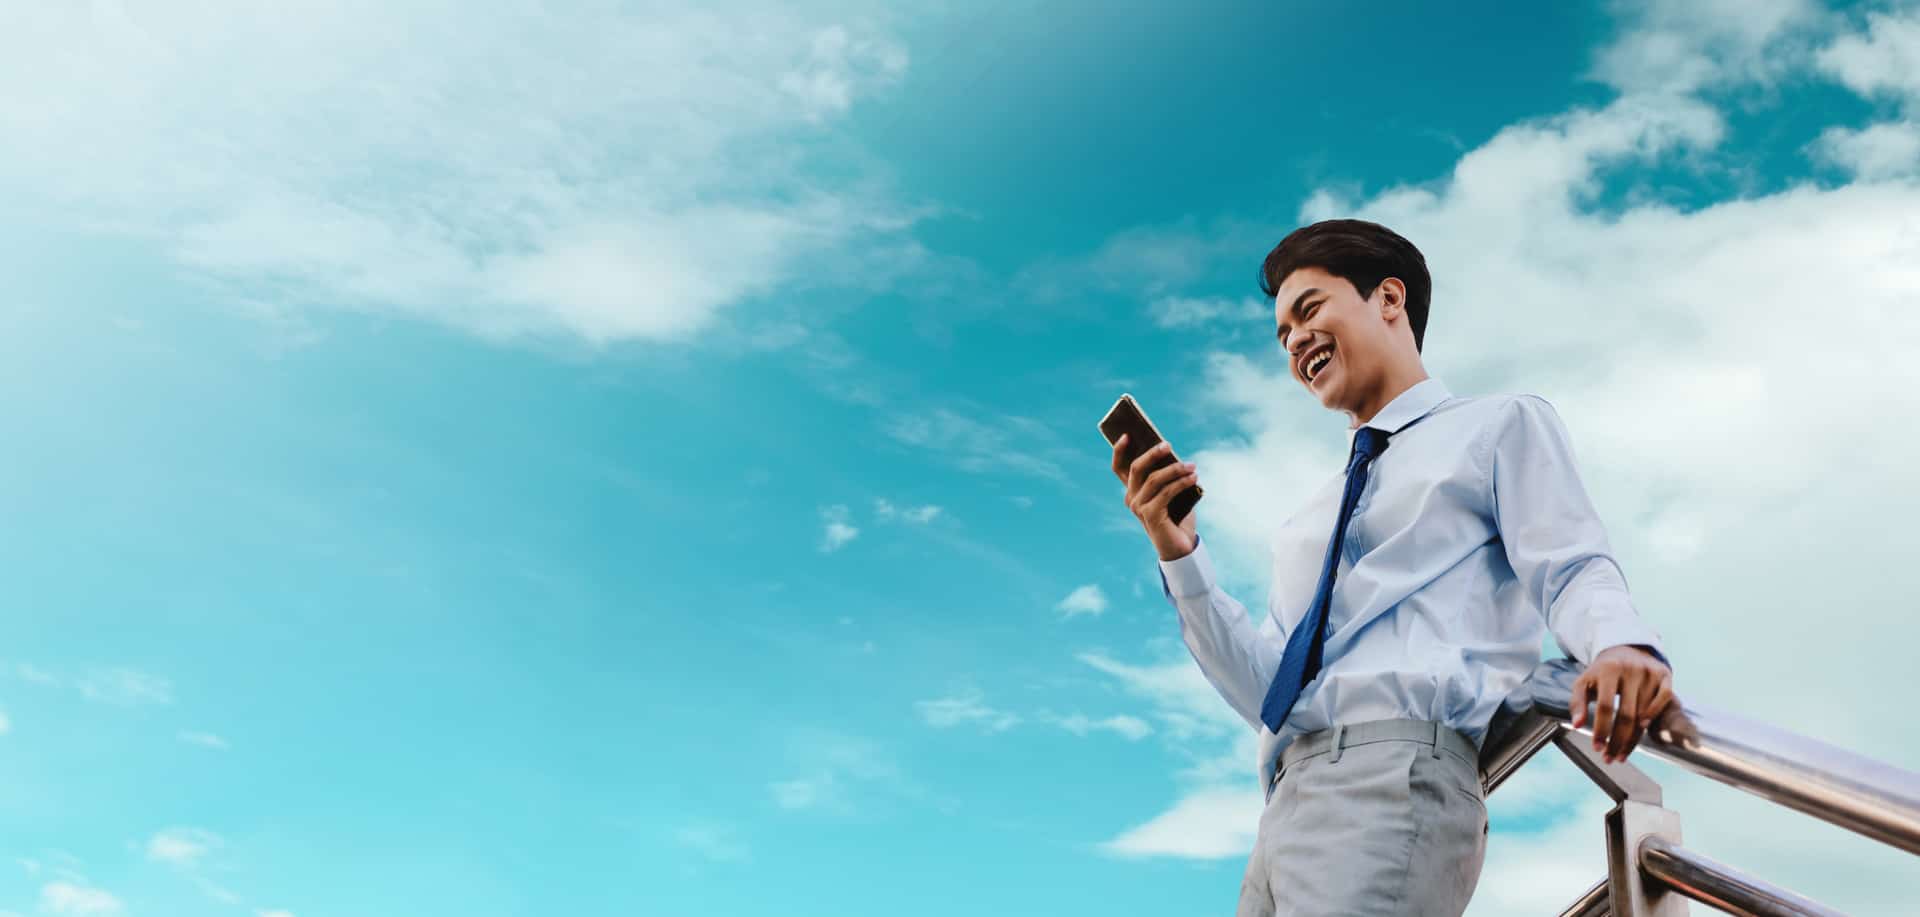 A smiling businessman uses a bulk SMS provider to send messages from his smartphone.